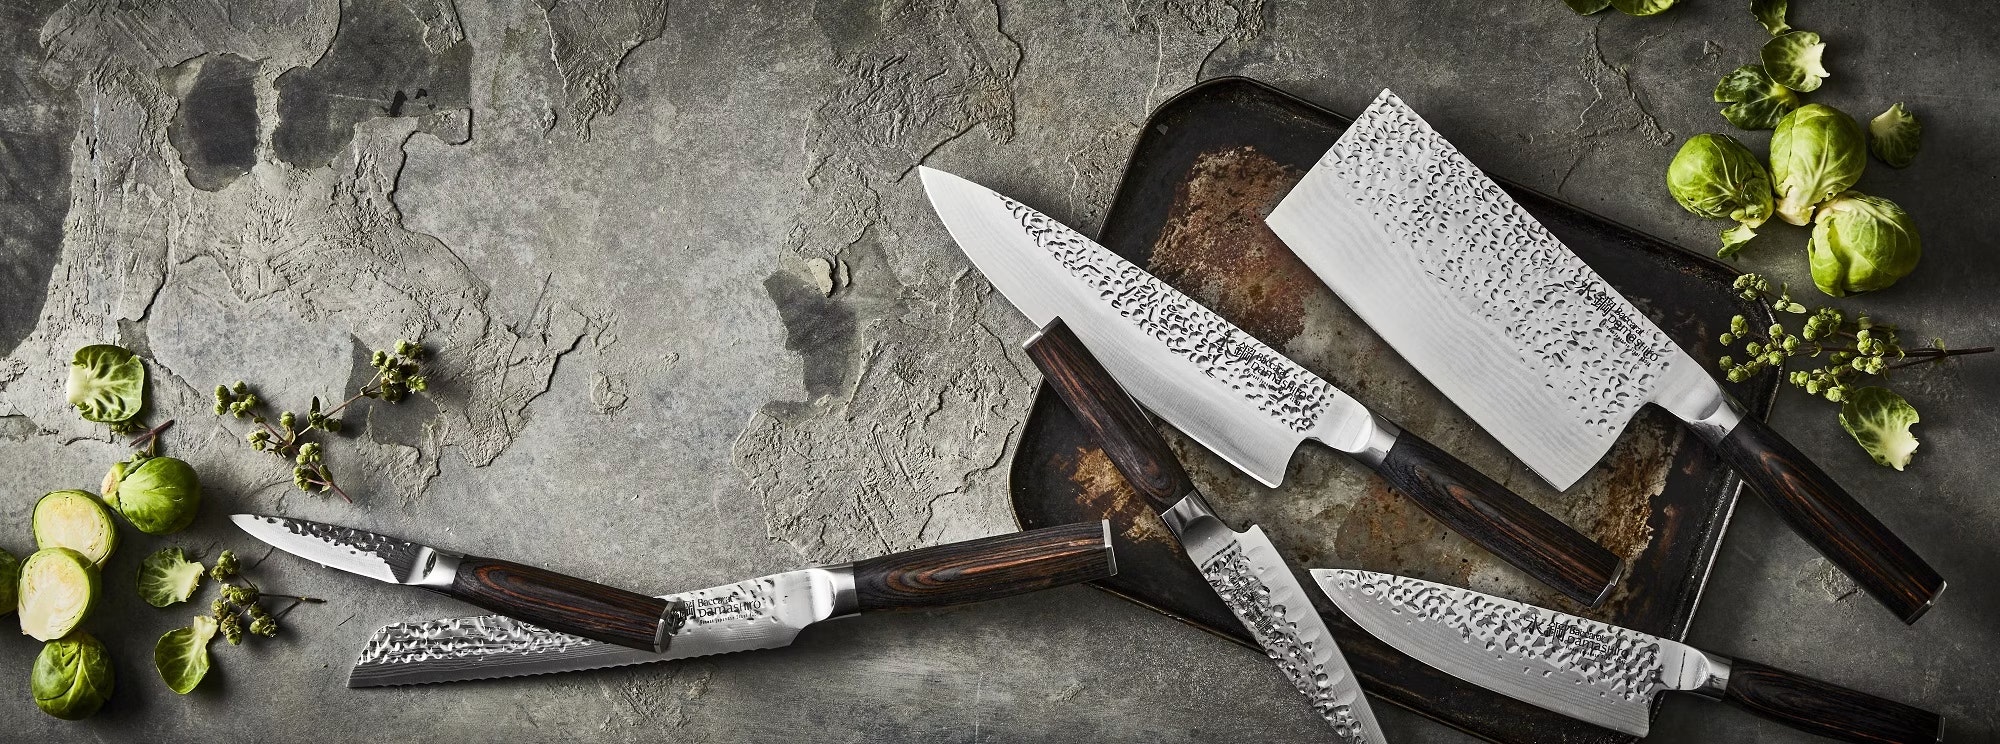 How To Dispose Of Old Knives - Kitchen Knife Disposal | House Blog